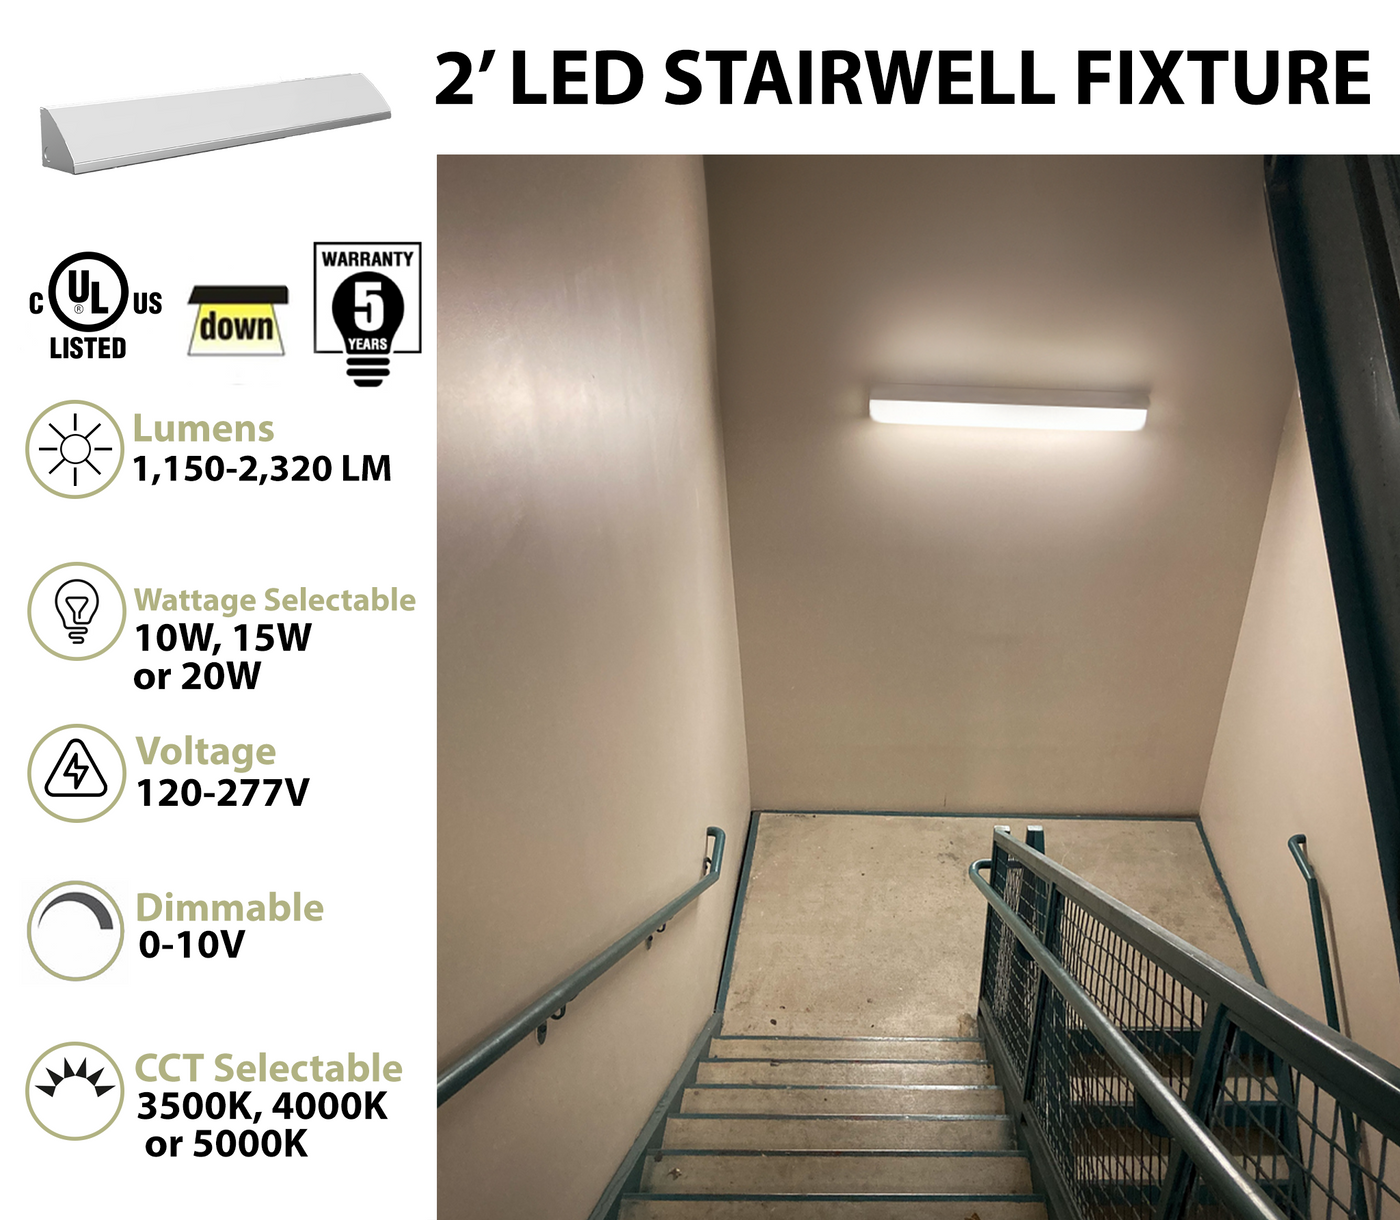 2 Foot LED Stairwell Light, 2320 Lumen Max, Wattage and CCT Selectable, 120-277V